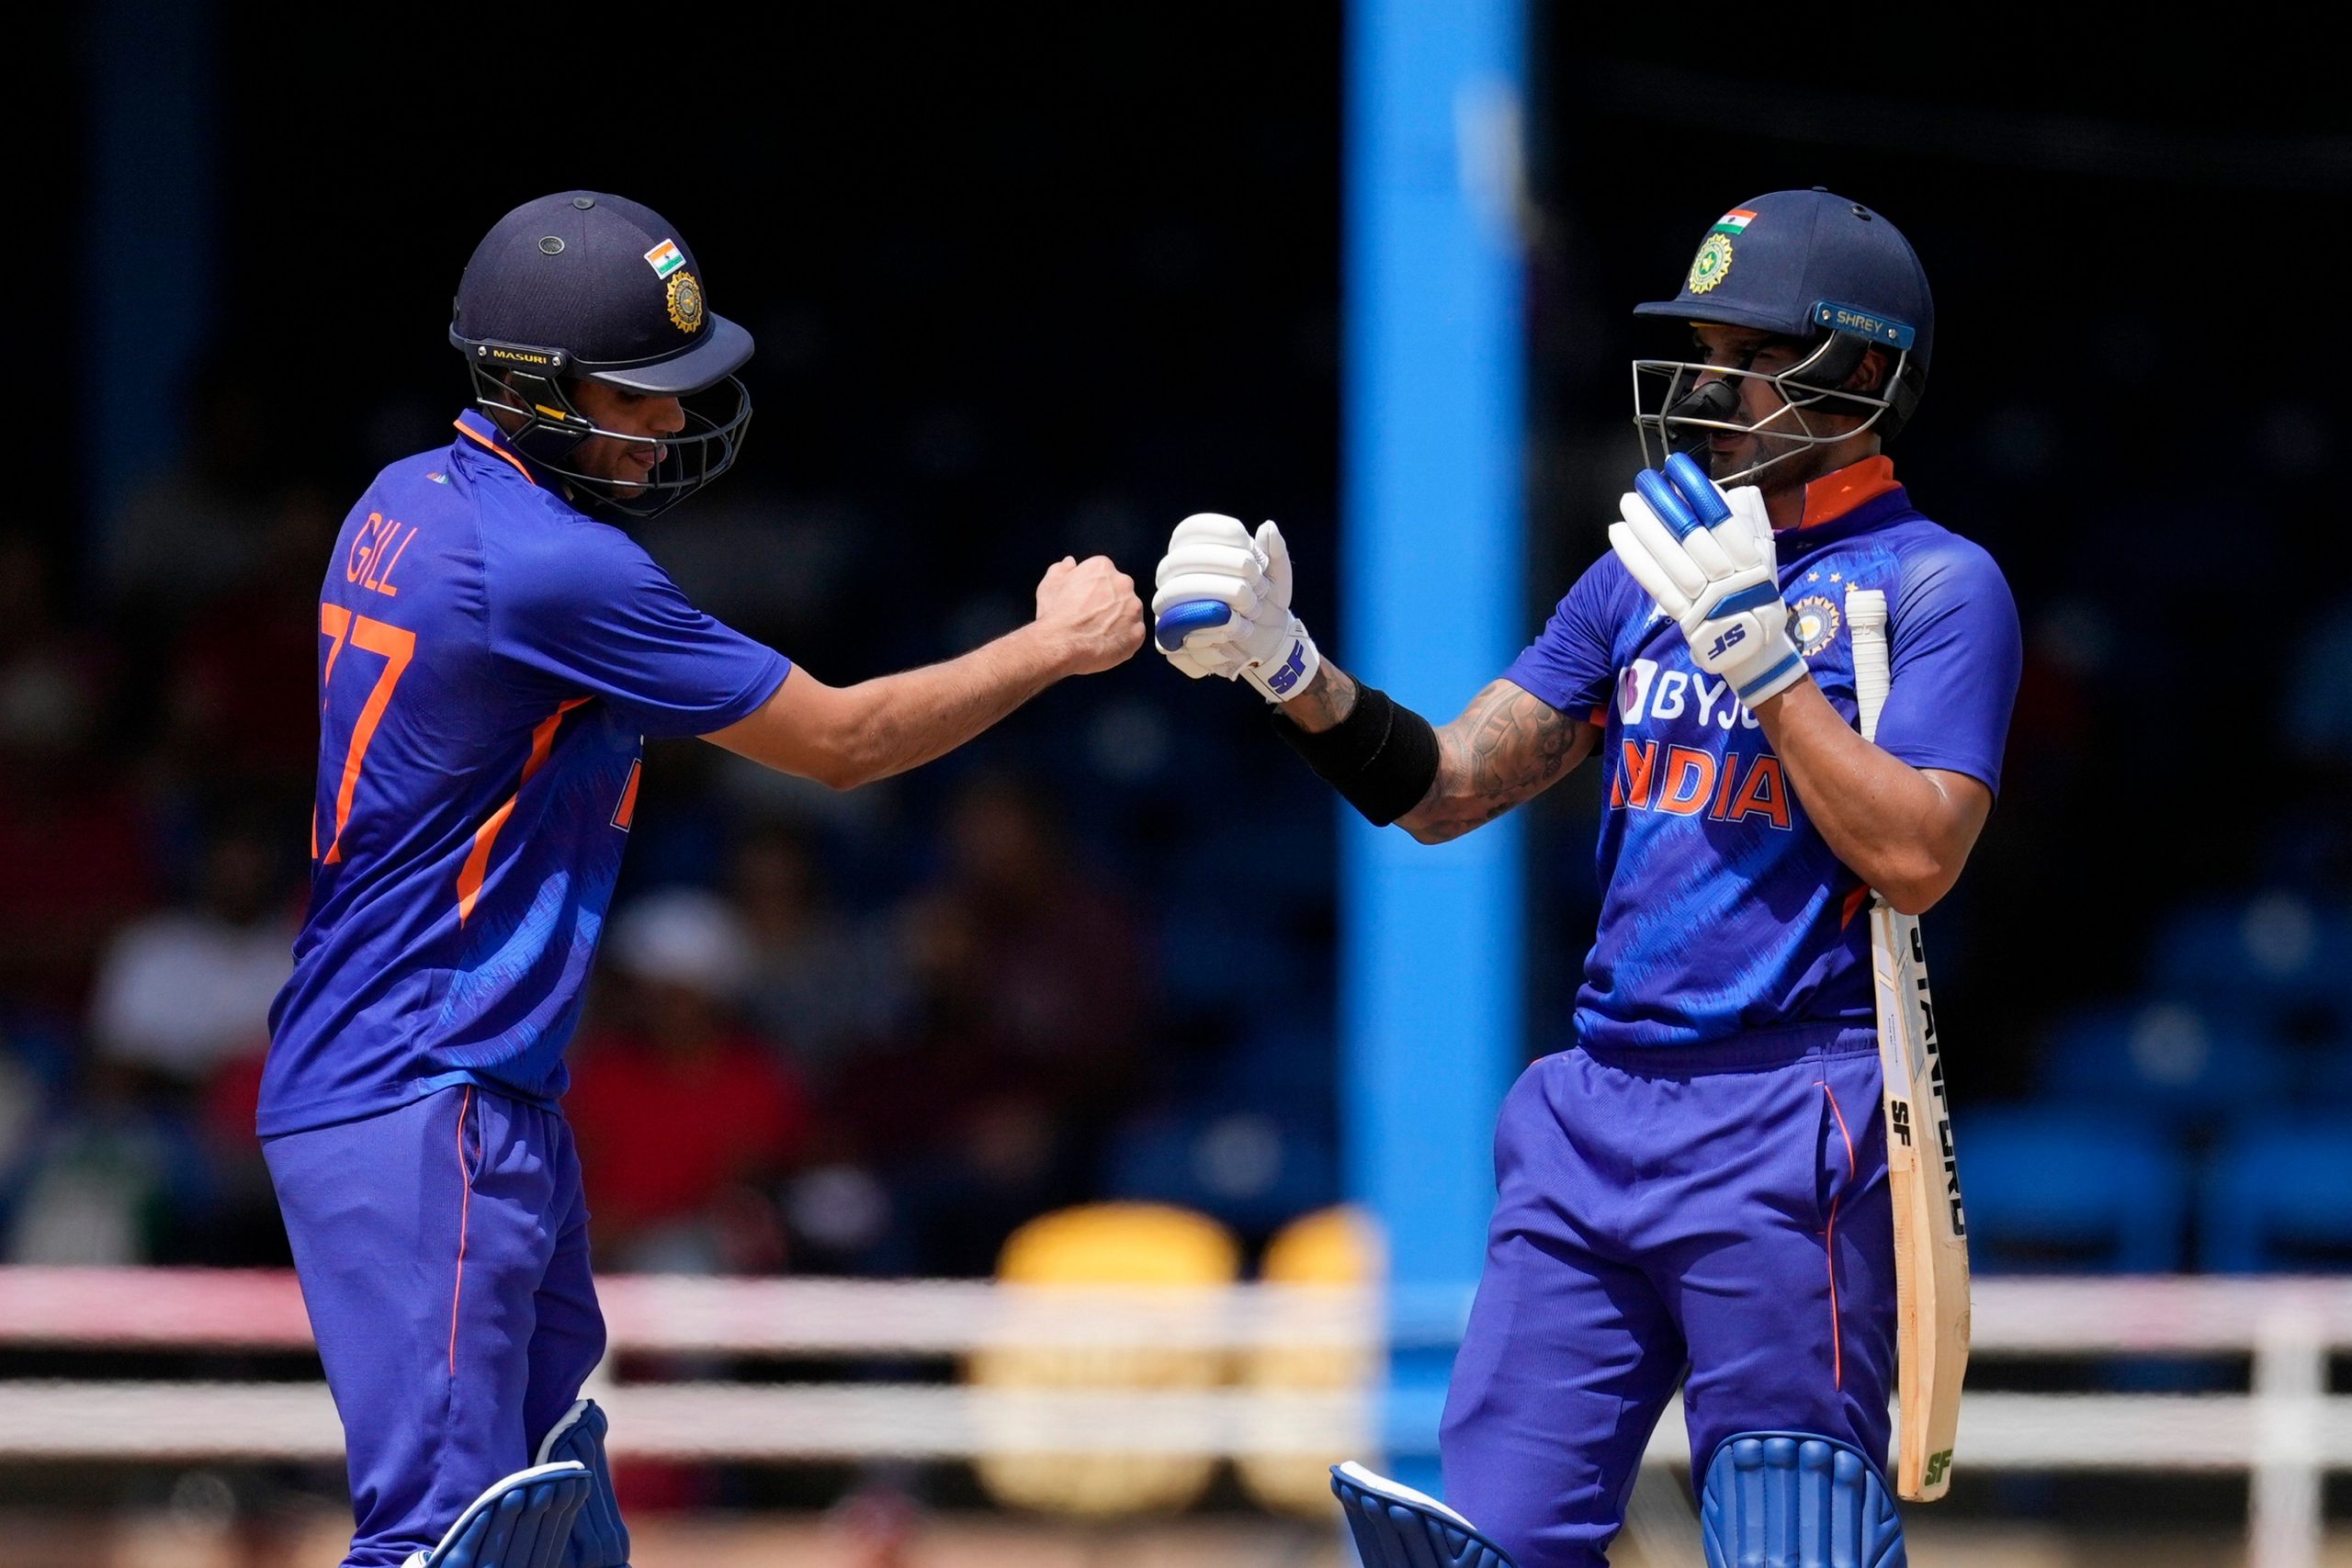 1st ODI: India clinch a 1-0 lead vs West Indies in nail-biting thriller